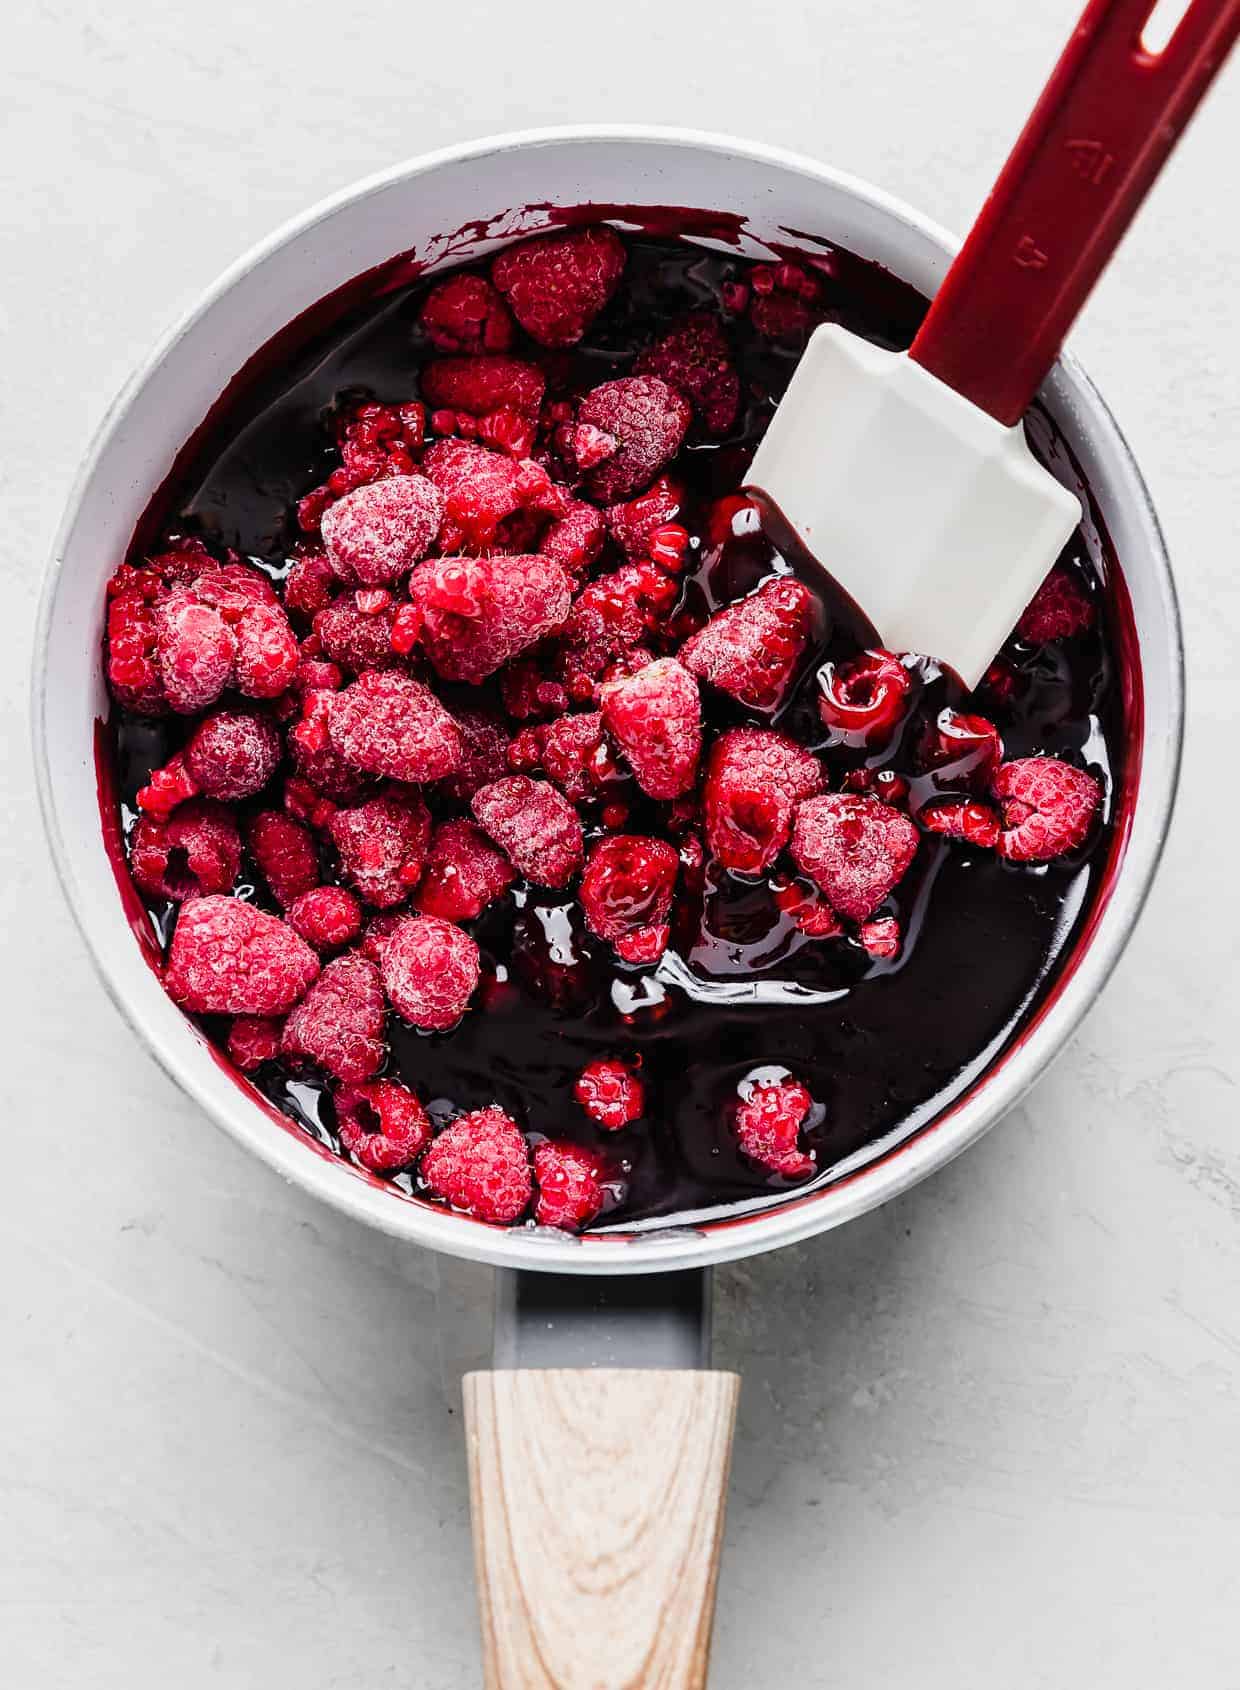 Frozen raspberries being stirred into a red sauce in a pot.